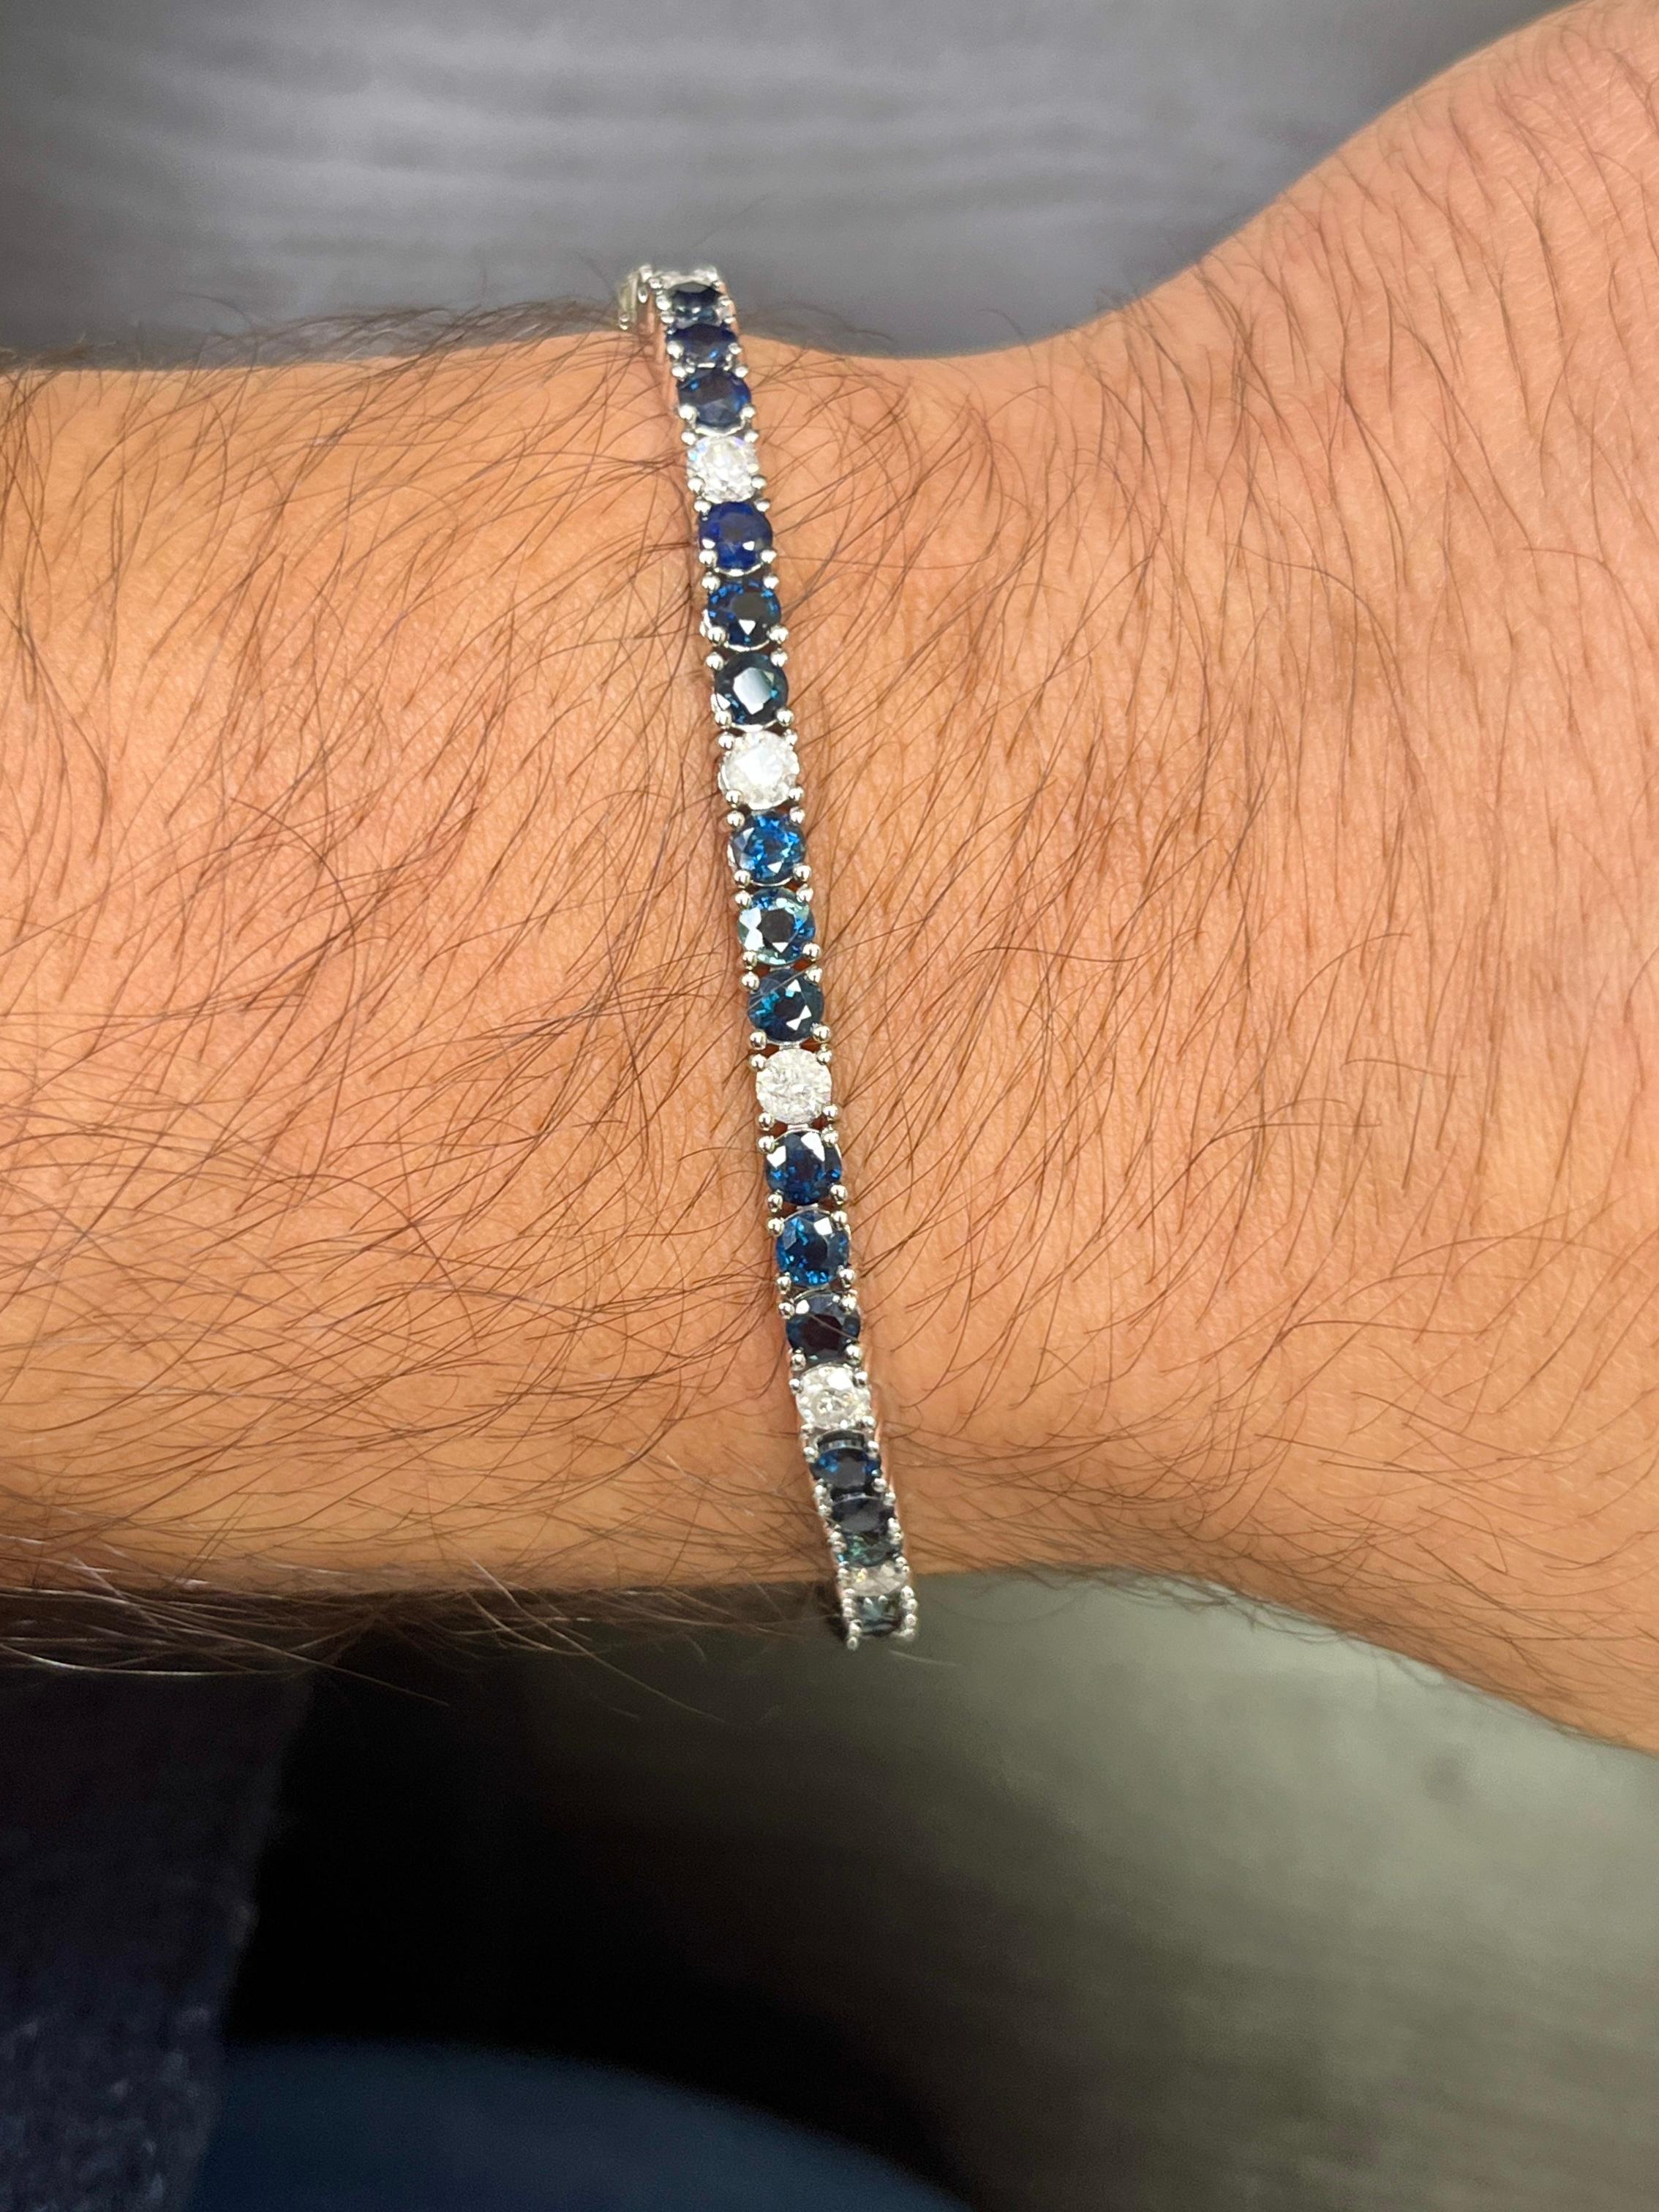 9.26 Carat Round Cut Natural Blue Sapphire and Diamond Tennis Bracelet in 18K White Gold.

This tennis bracelet features a stunning collection of round-cut blue sapphires totaling 7.58 carats. The sapphires are matched with thirteen alternating